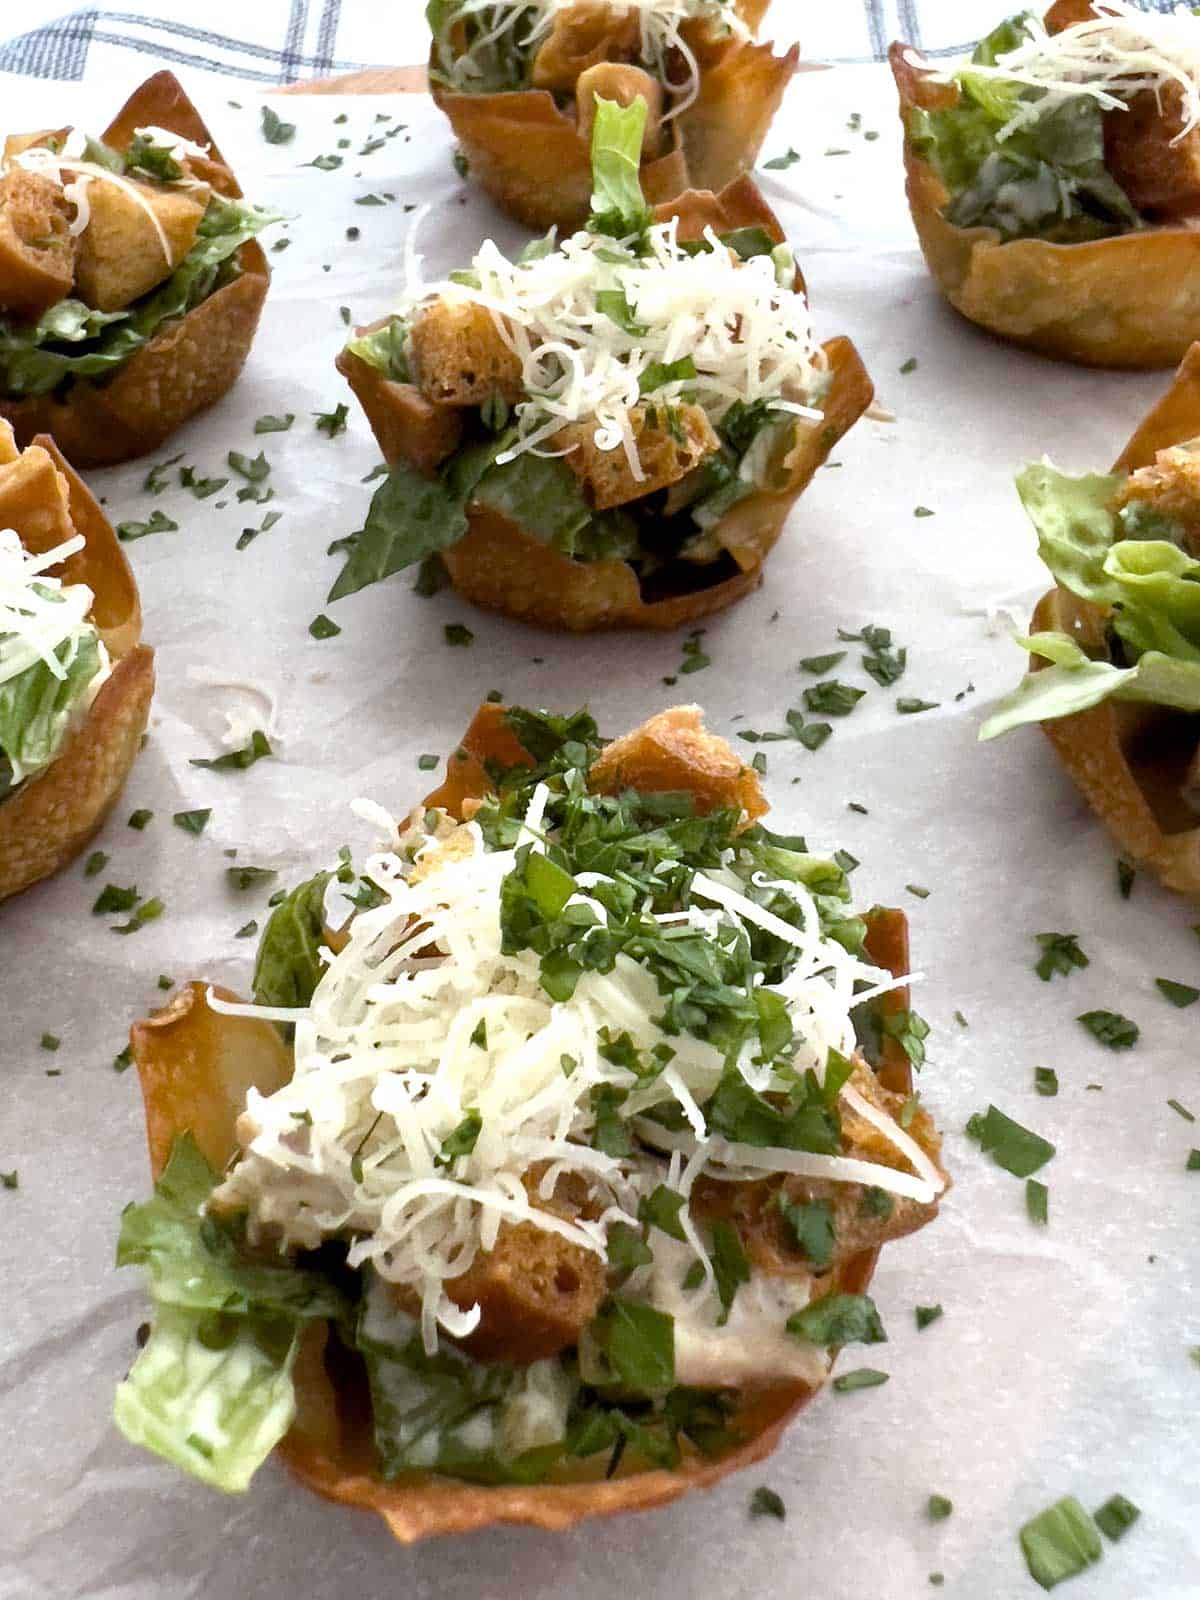 Chicken Caesar salad cups topped with croutons and parmesan cheese.